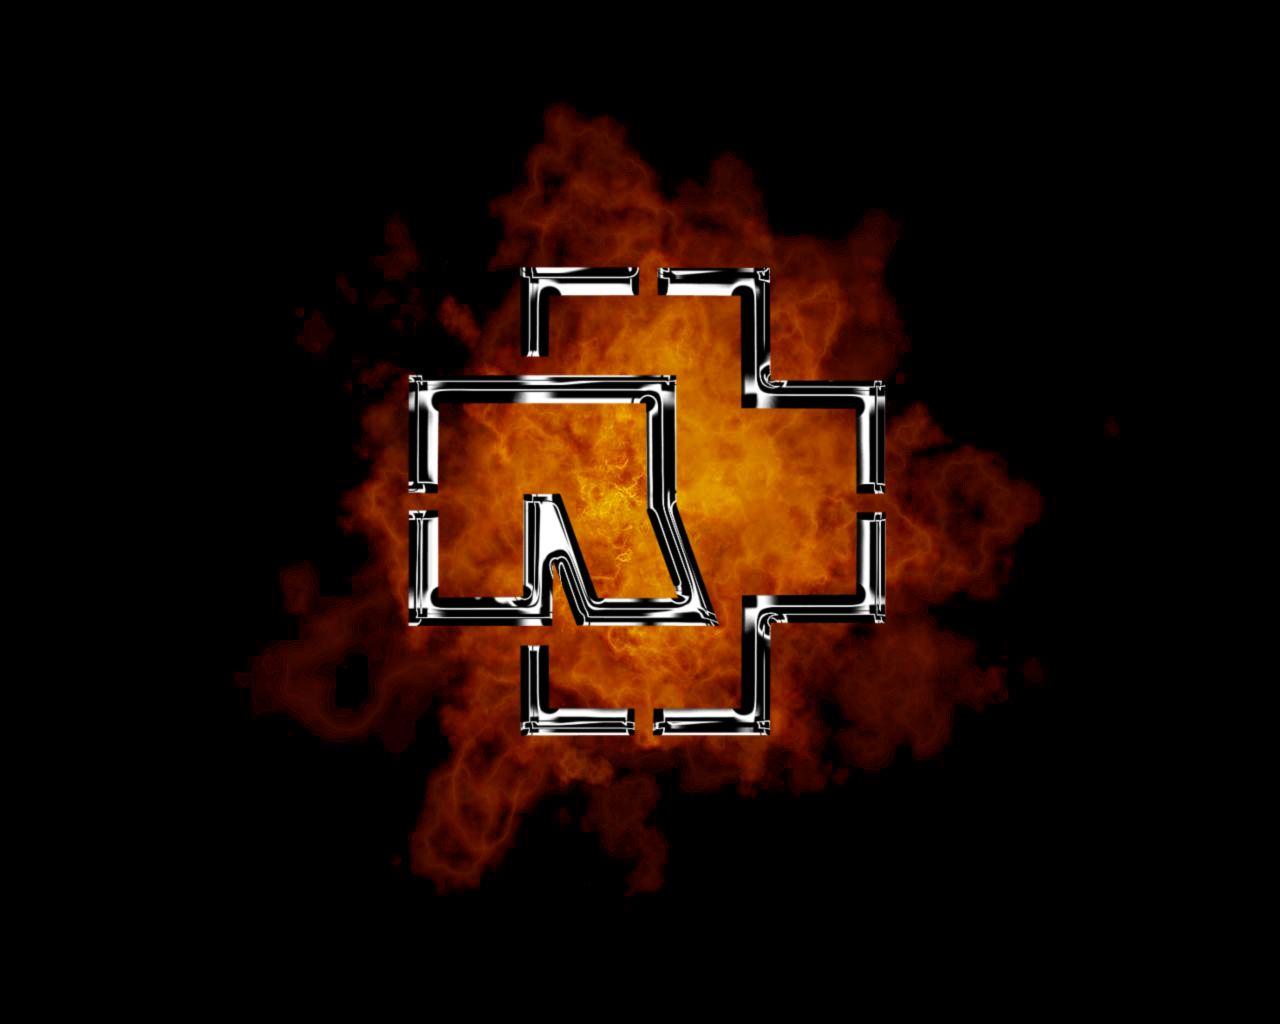 Rammstein. Got a sweat shirt with this logo on it!. ♪♫Musik